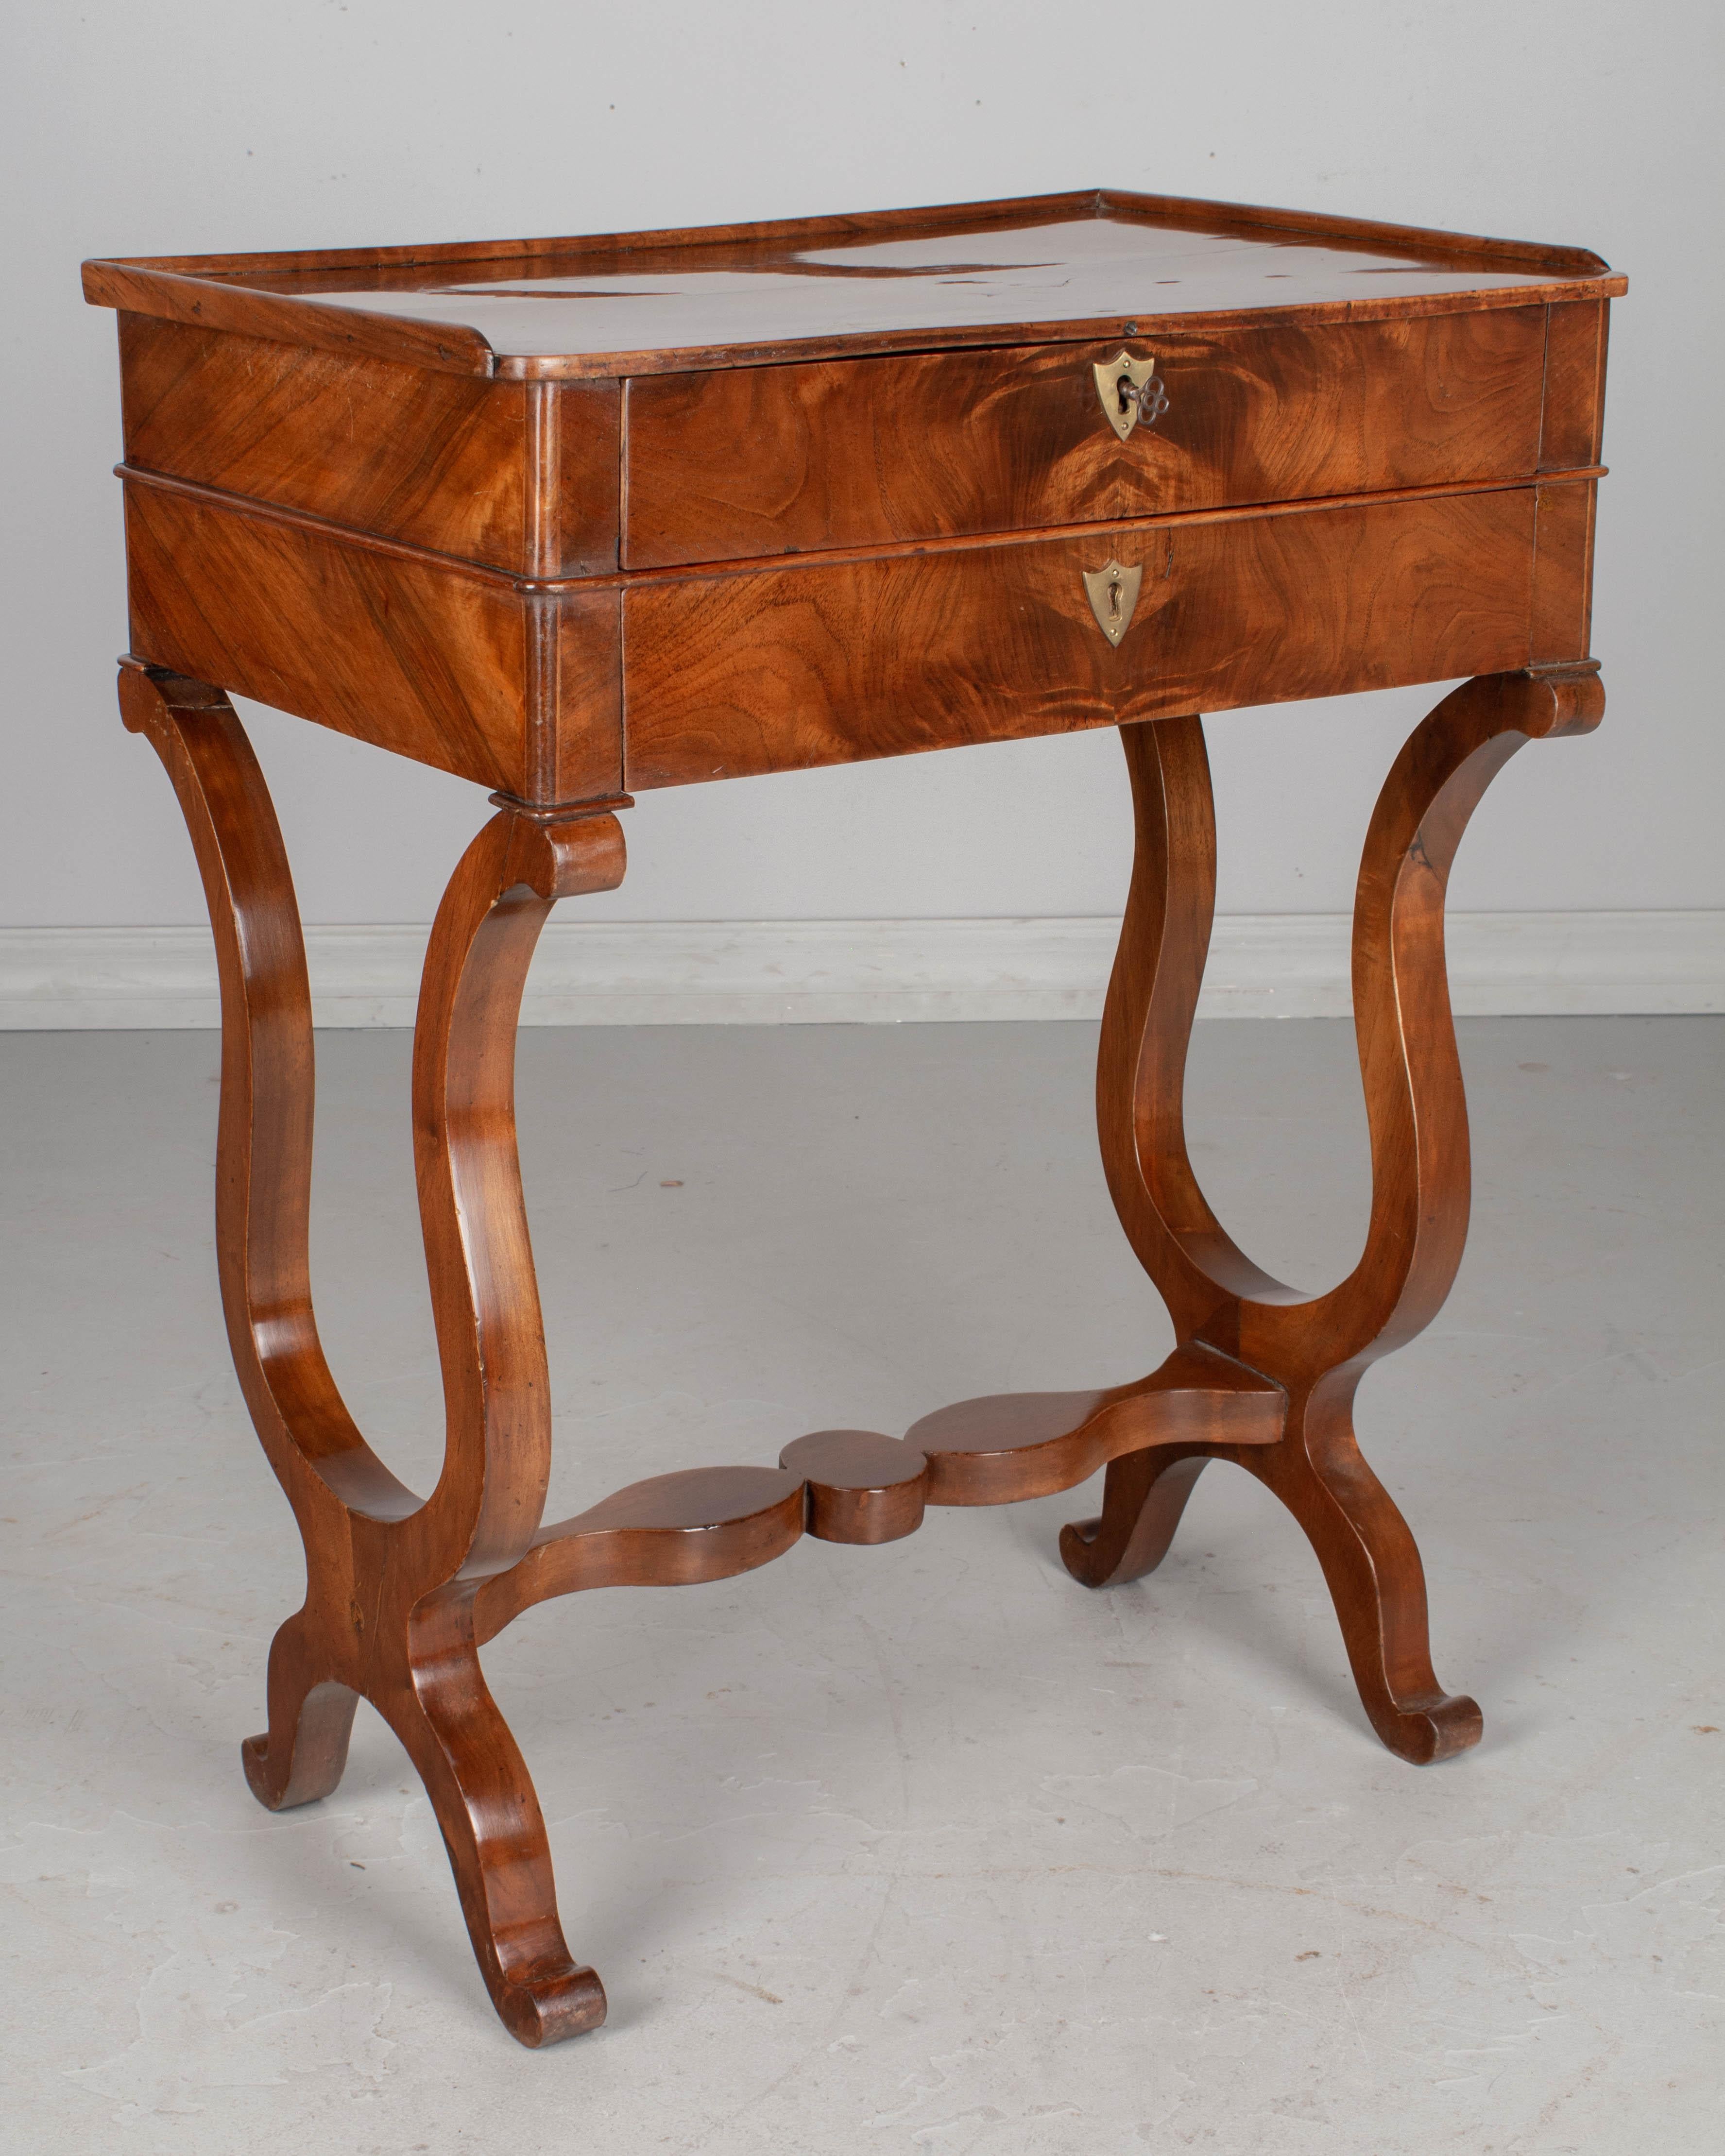 A 19th century French Restauration style side table made of book matched veneer of walnut with beautiful wood grain and French polish finish. Two dovetailed drawers with working locks and one key. Replaced brass escutcheons. A sturdy table with lyre